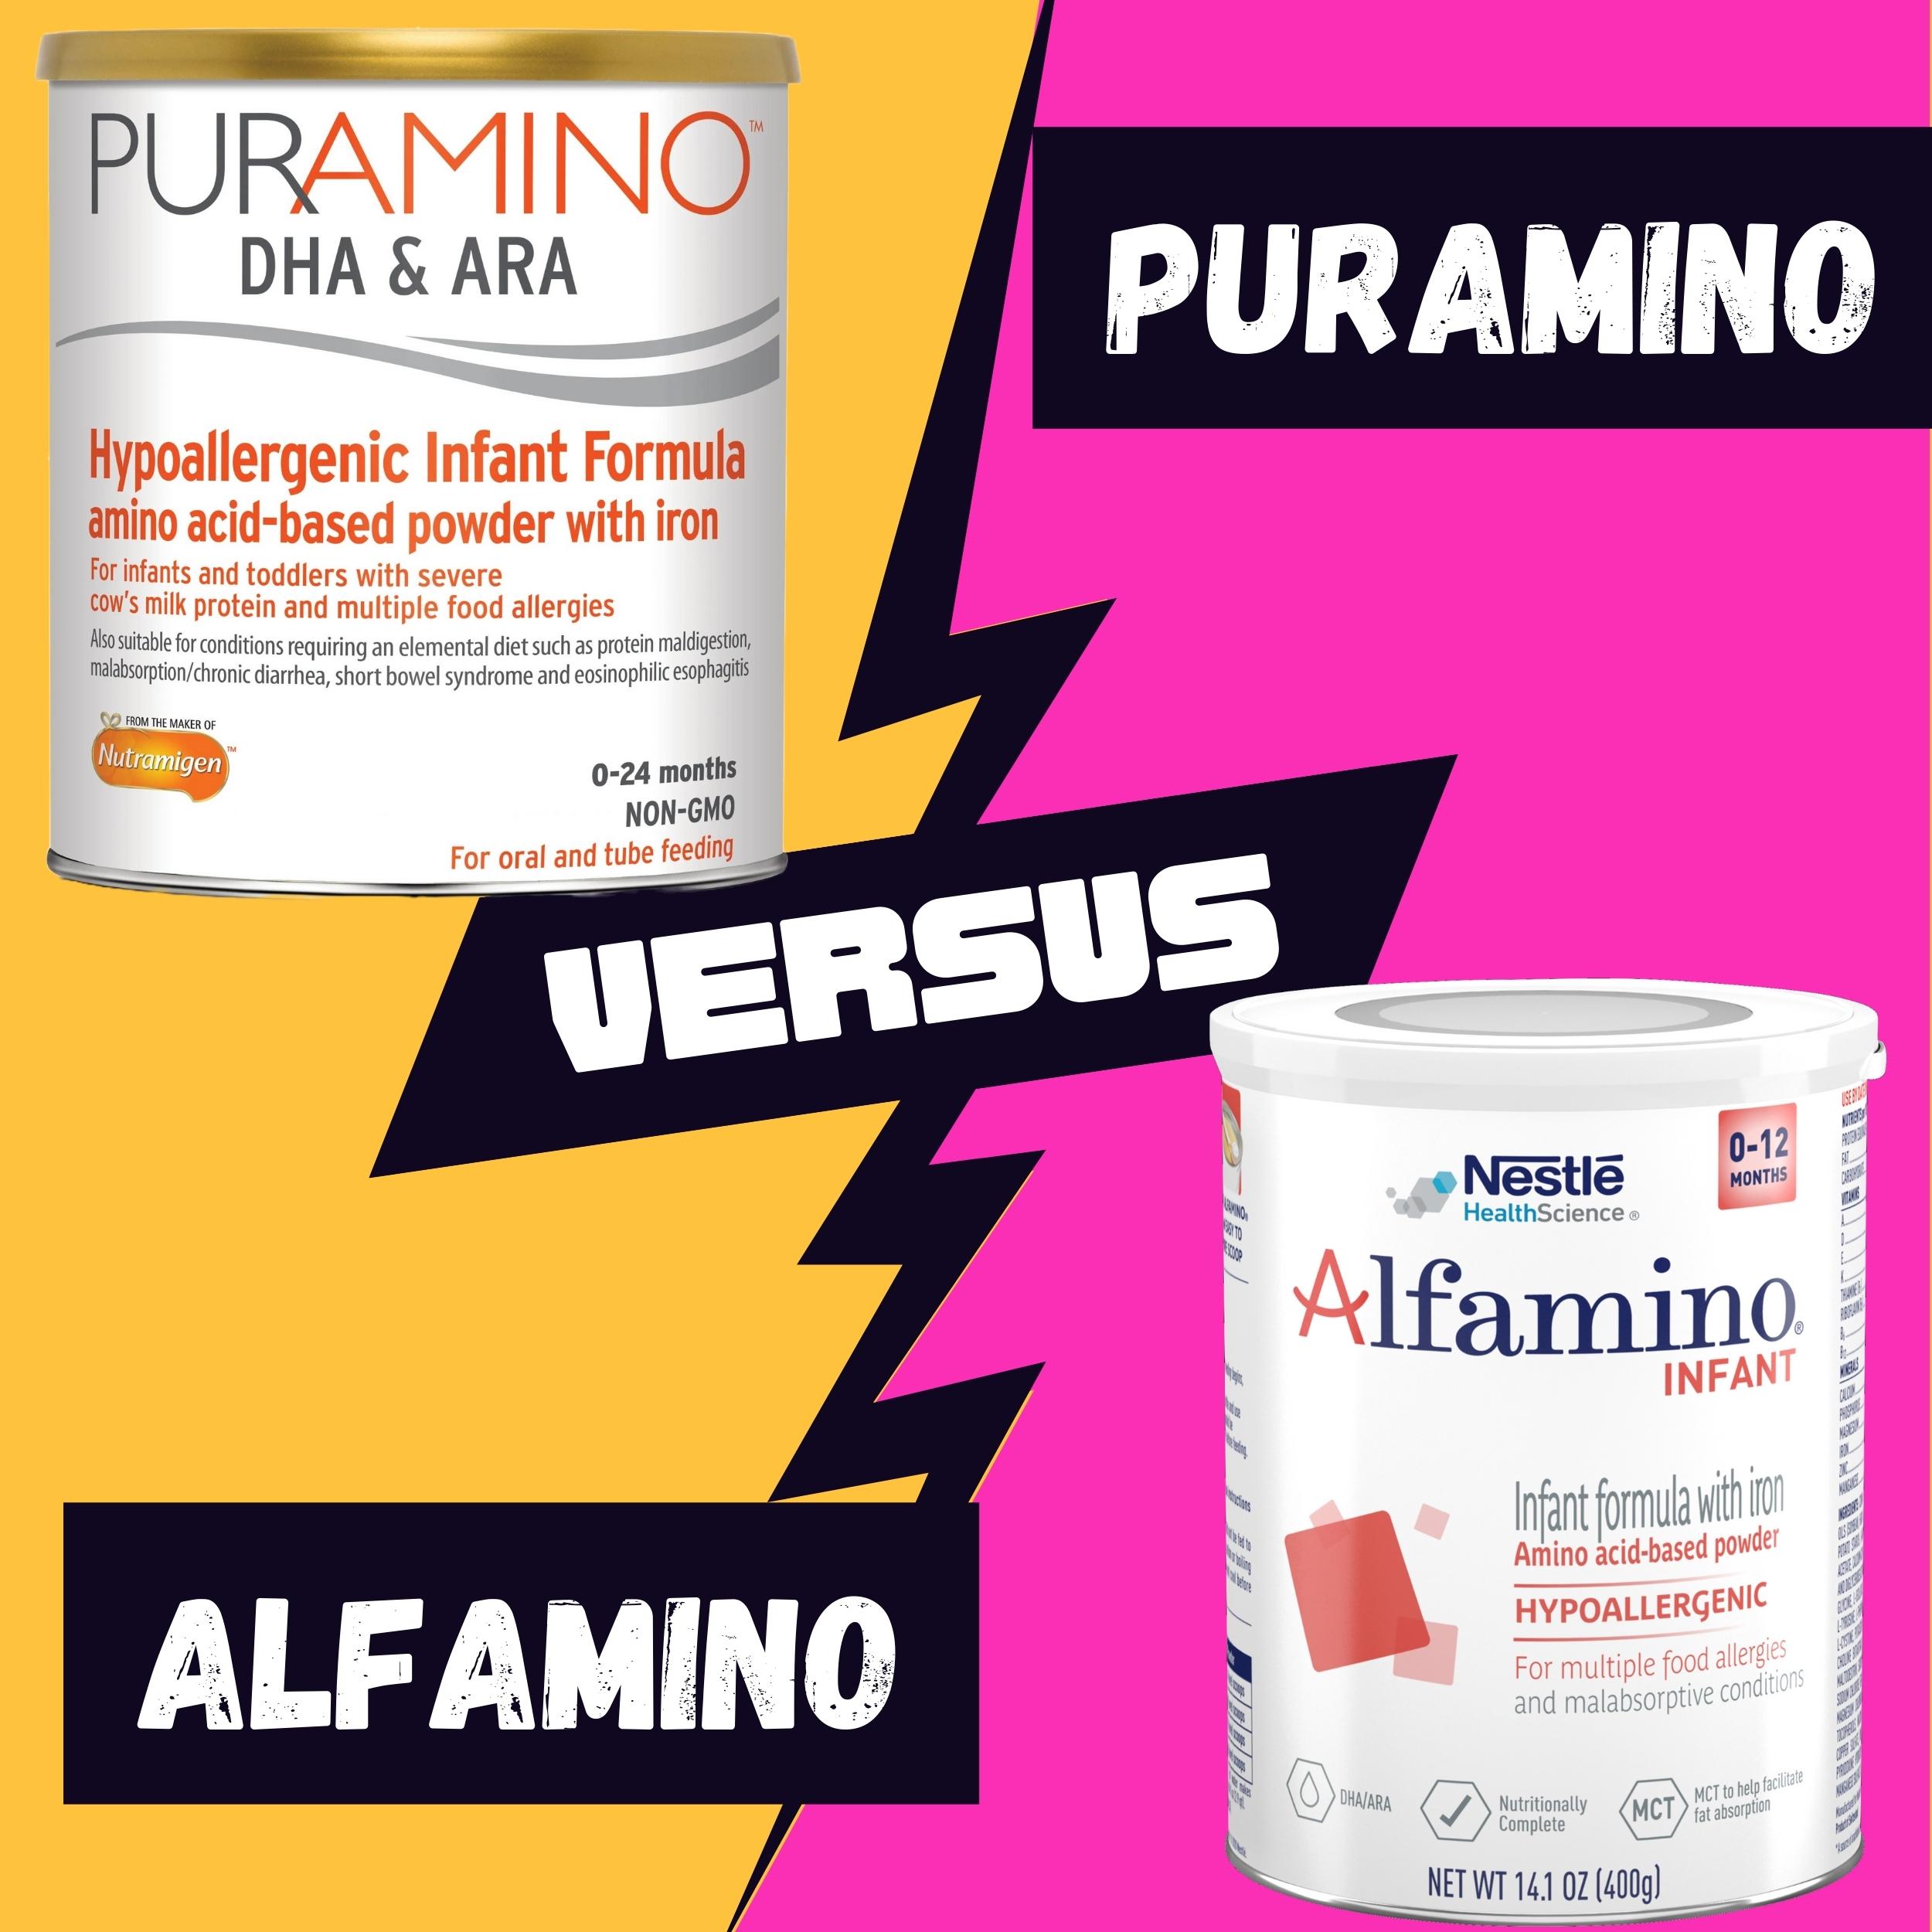 You are currently viewing Puramino Vs Alfamino: Which One is The Best?